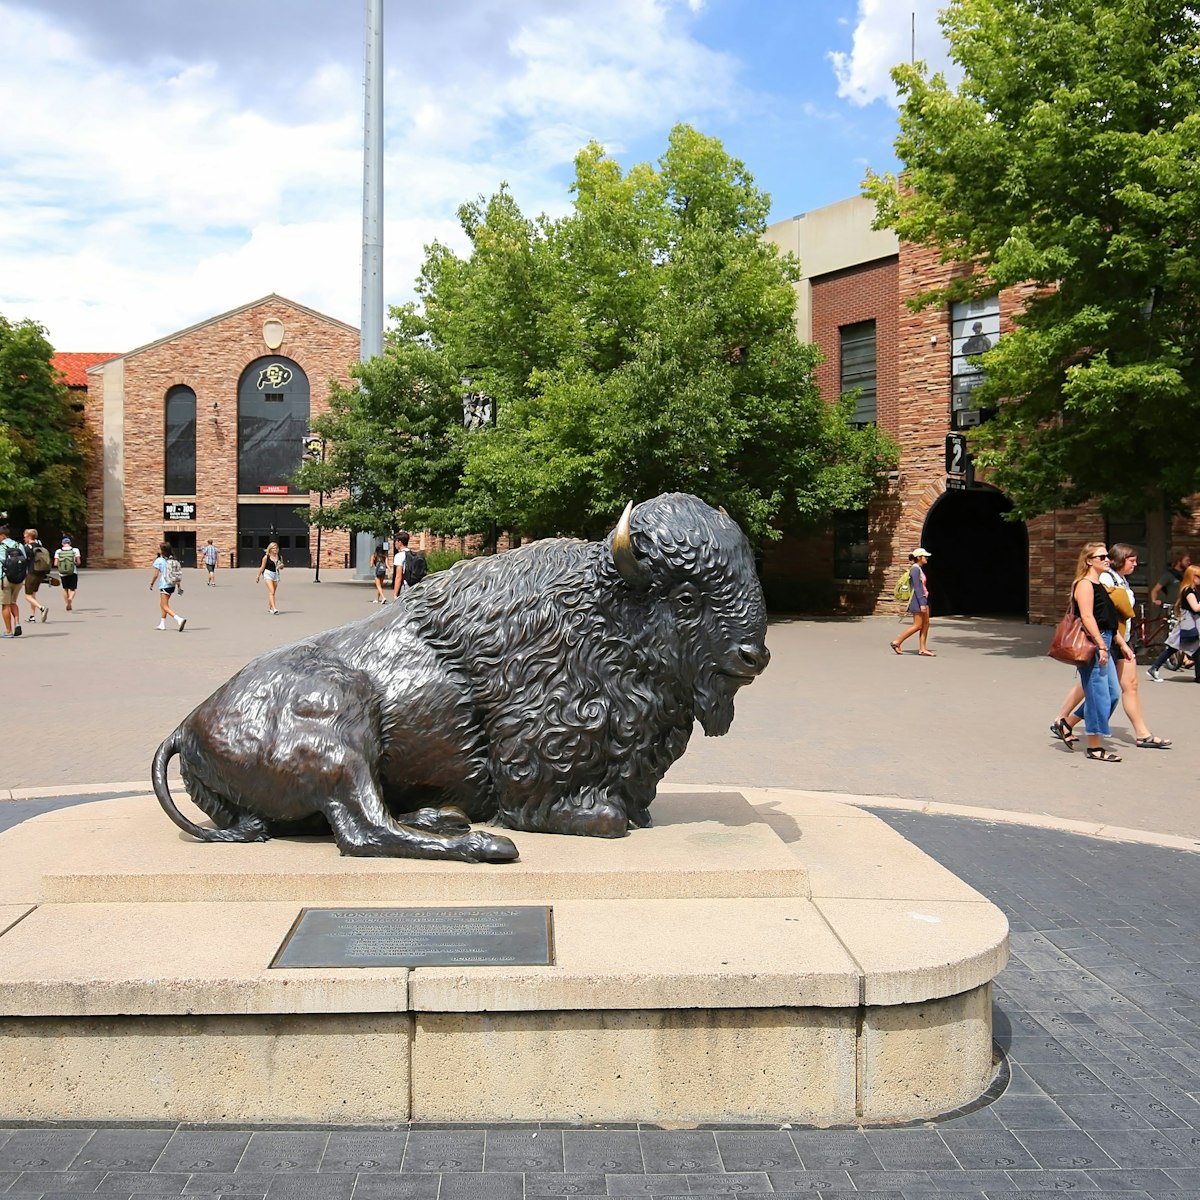 BOULDER, COLORADO, USA - AUGUST:  University of Colorado bison's mascot "Ralphie" located on the campus of the University of Colorado adjacent to Folsom Football Field as seen on August 31, 2018; Shutterstock ID 1174264429; your: Bridget Brown; gl: 65050; netsuite: Online Editorial; full: POI Image Update